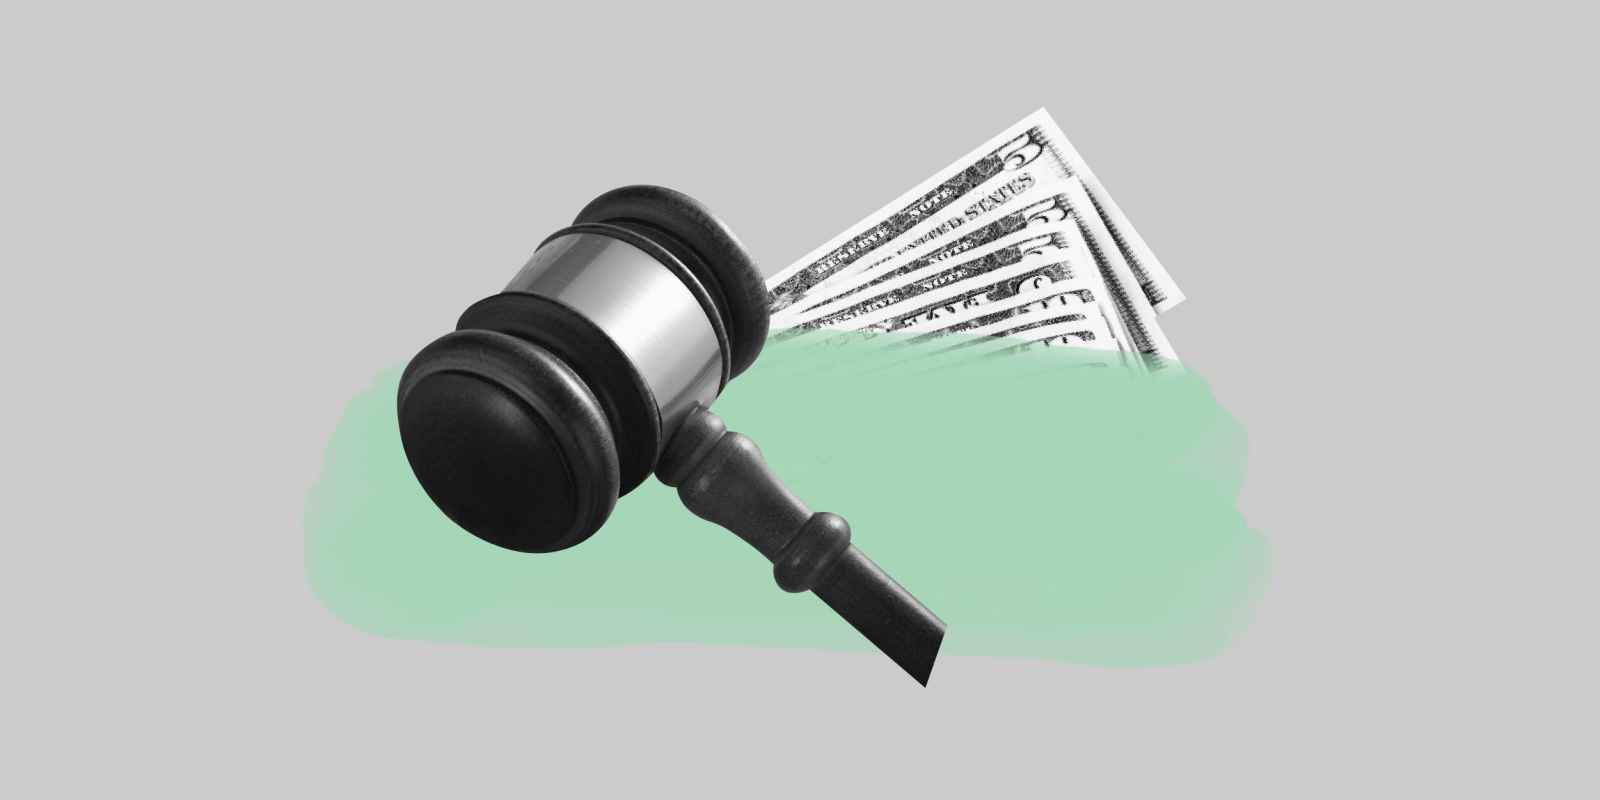 Gray background. Light green paint streak. Behind it a stack of money, in front of it a black and white gavel 